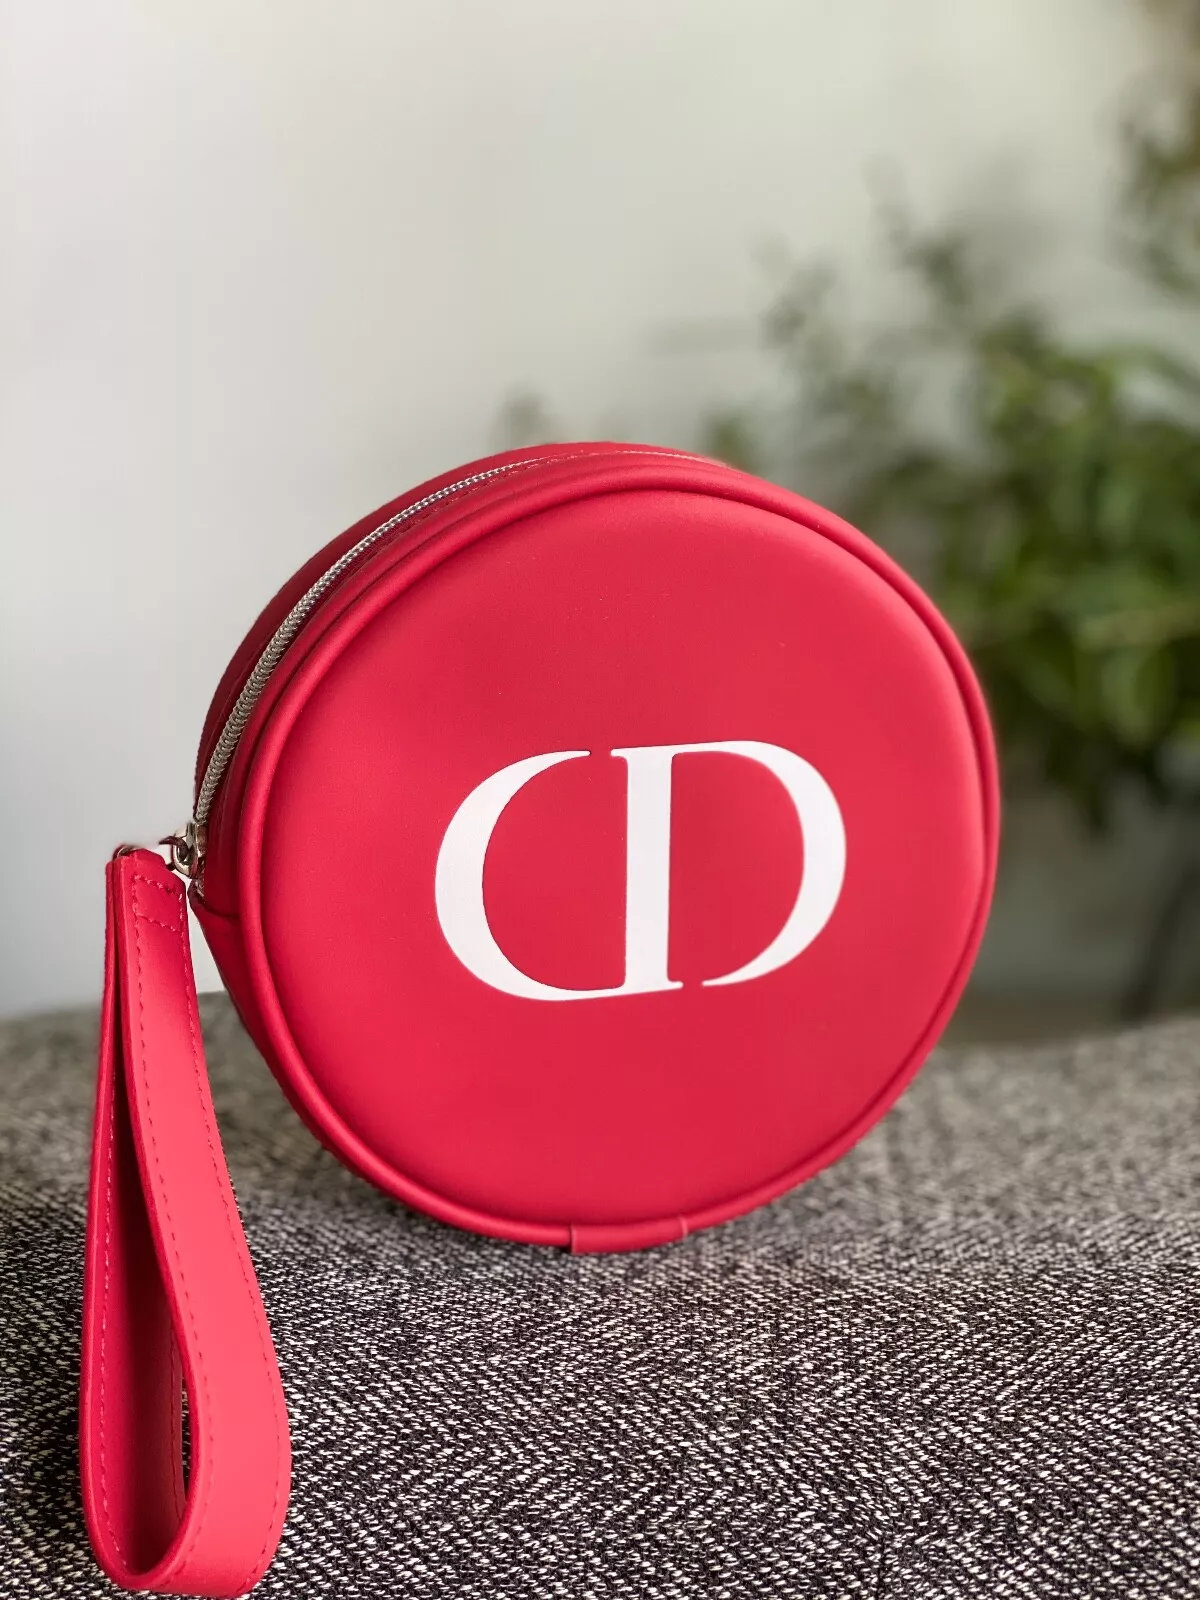 New DIOR BEAUTY RED MAKEUP COSMETIC BAG MAKEUP POUCH  - £14.95 GBP